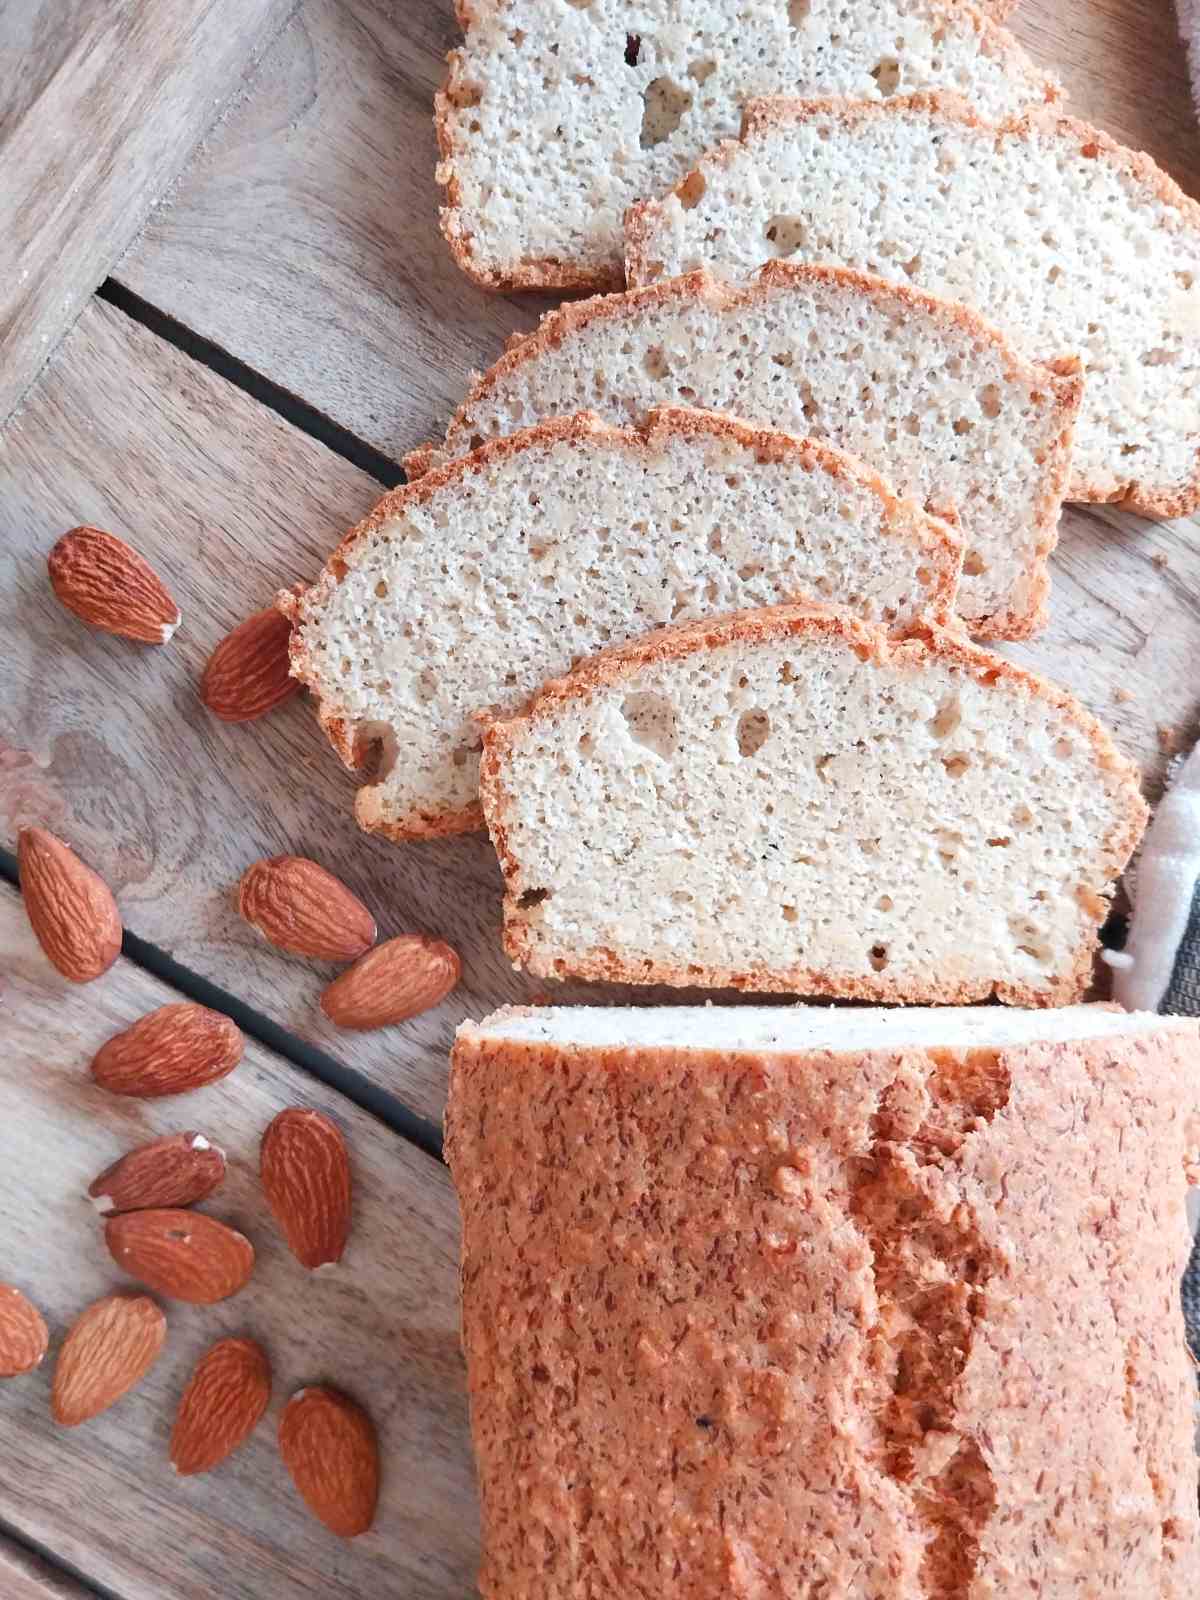 Low carb almond bread sliced with almonds next to it on a wooden surface.